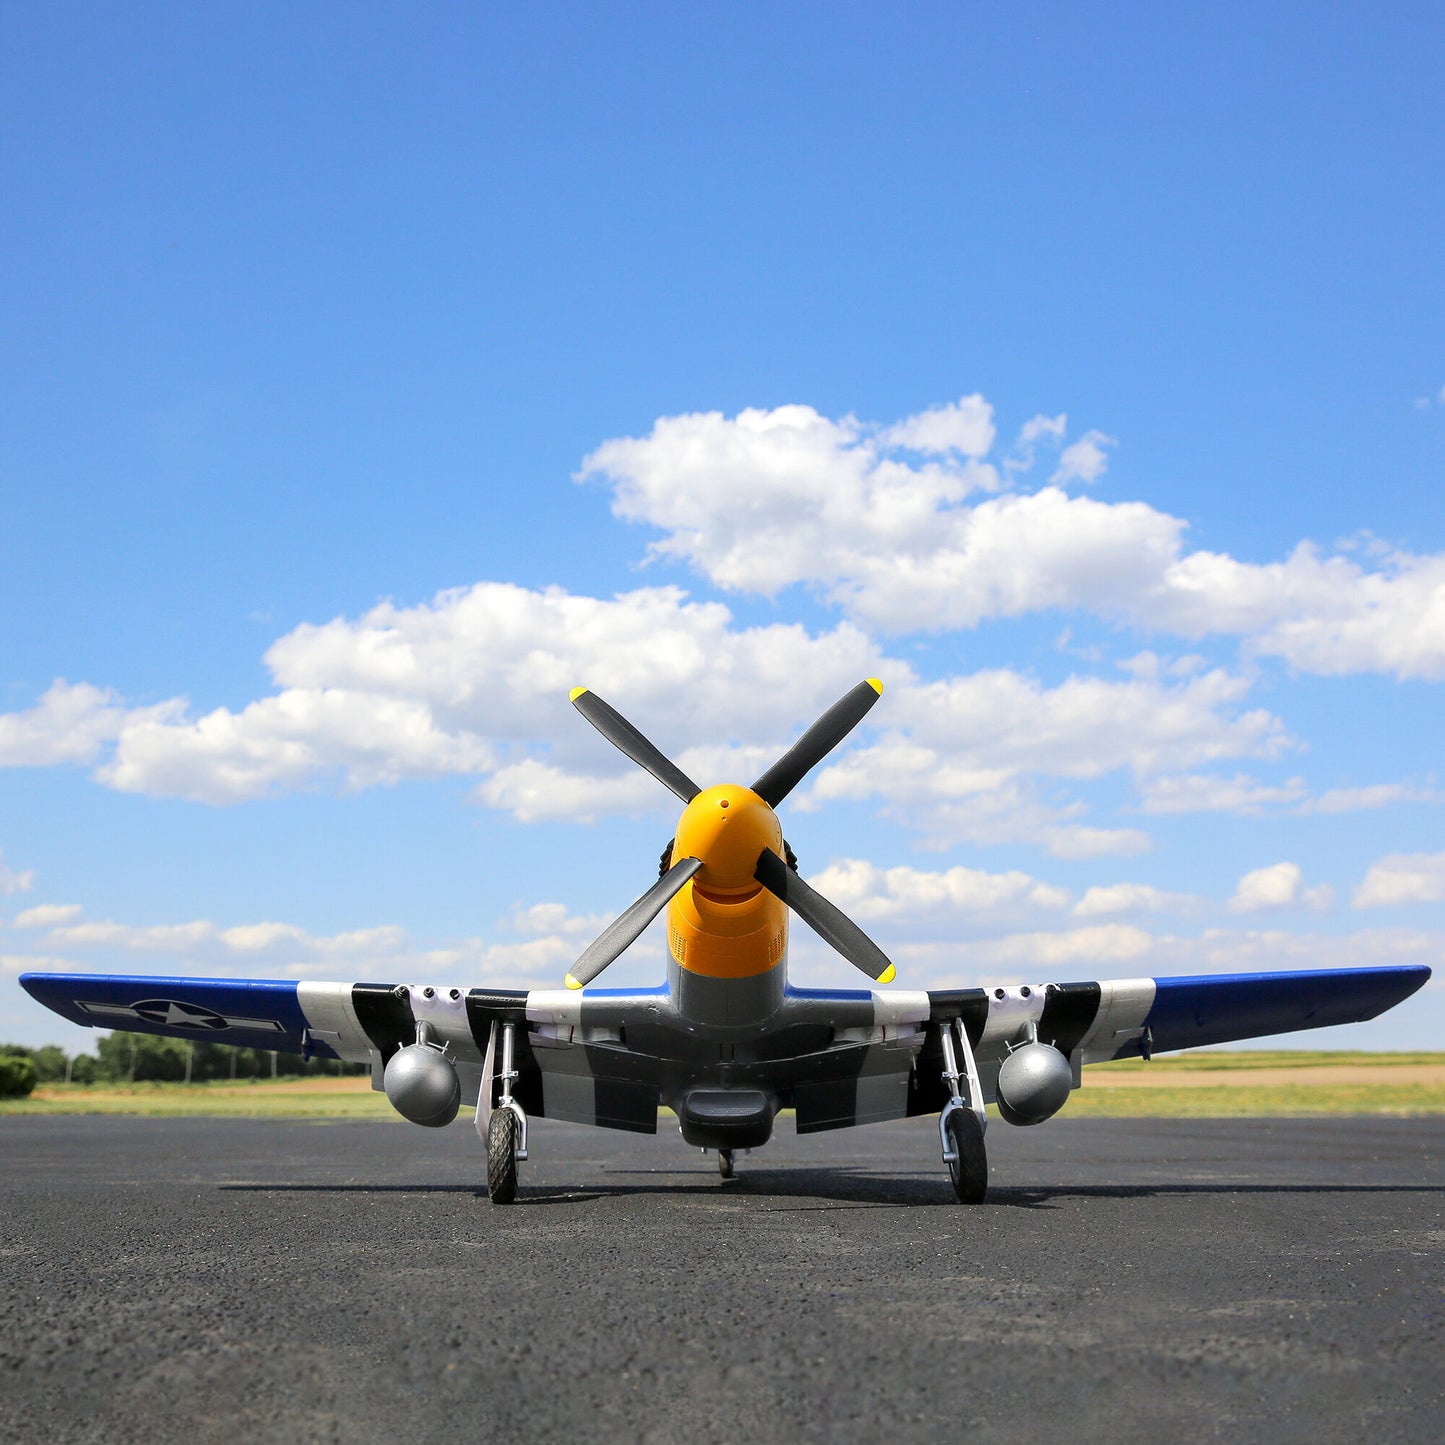 E-Flite P-51D Mustang 1.5m BNF Basic with Smart